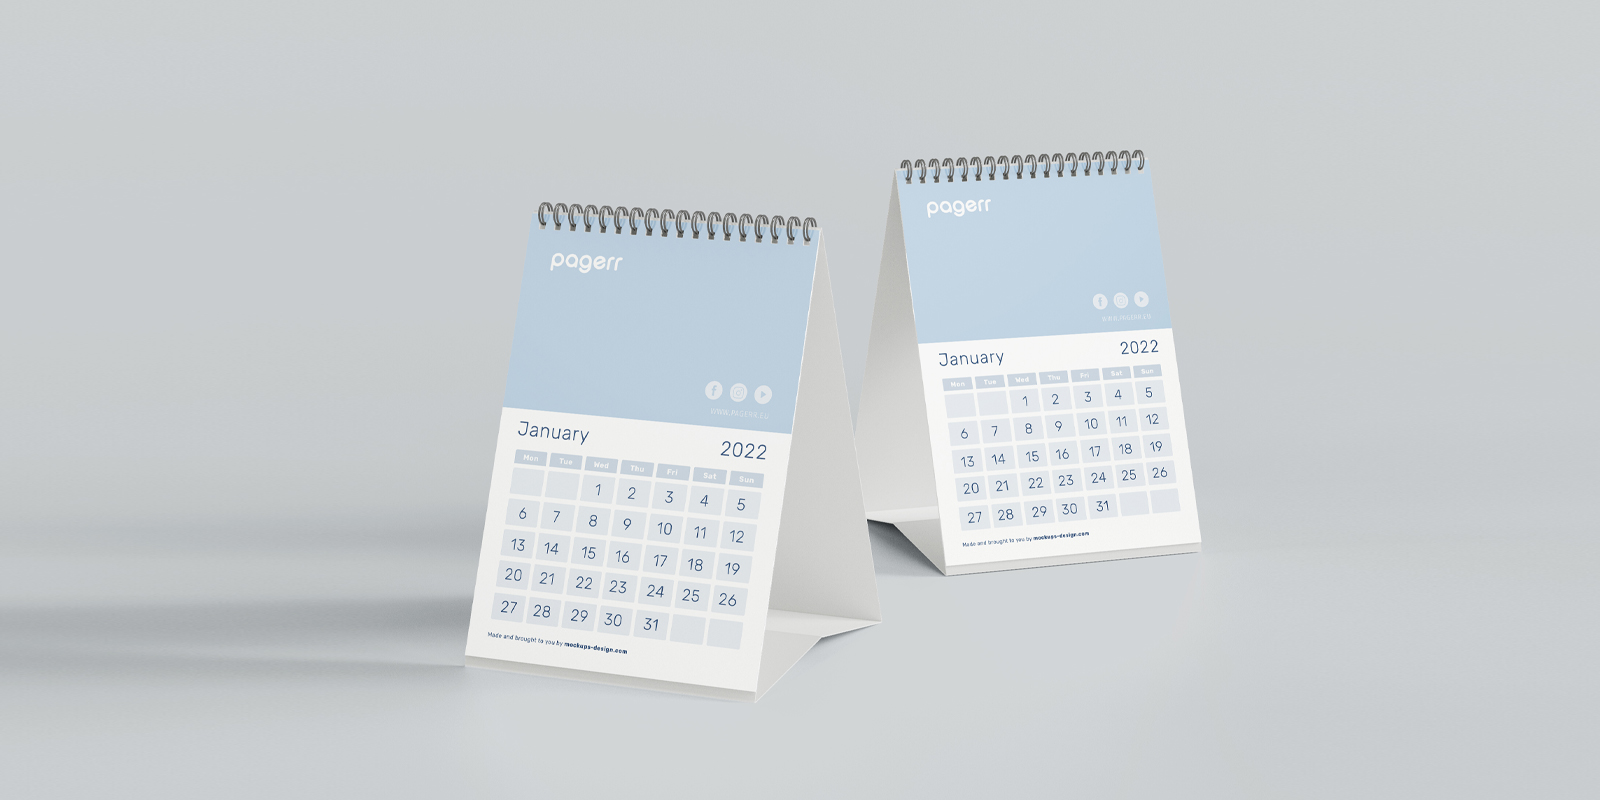 Desk calendars in Berlin - Print with Pagerr